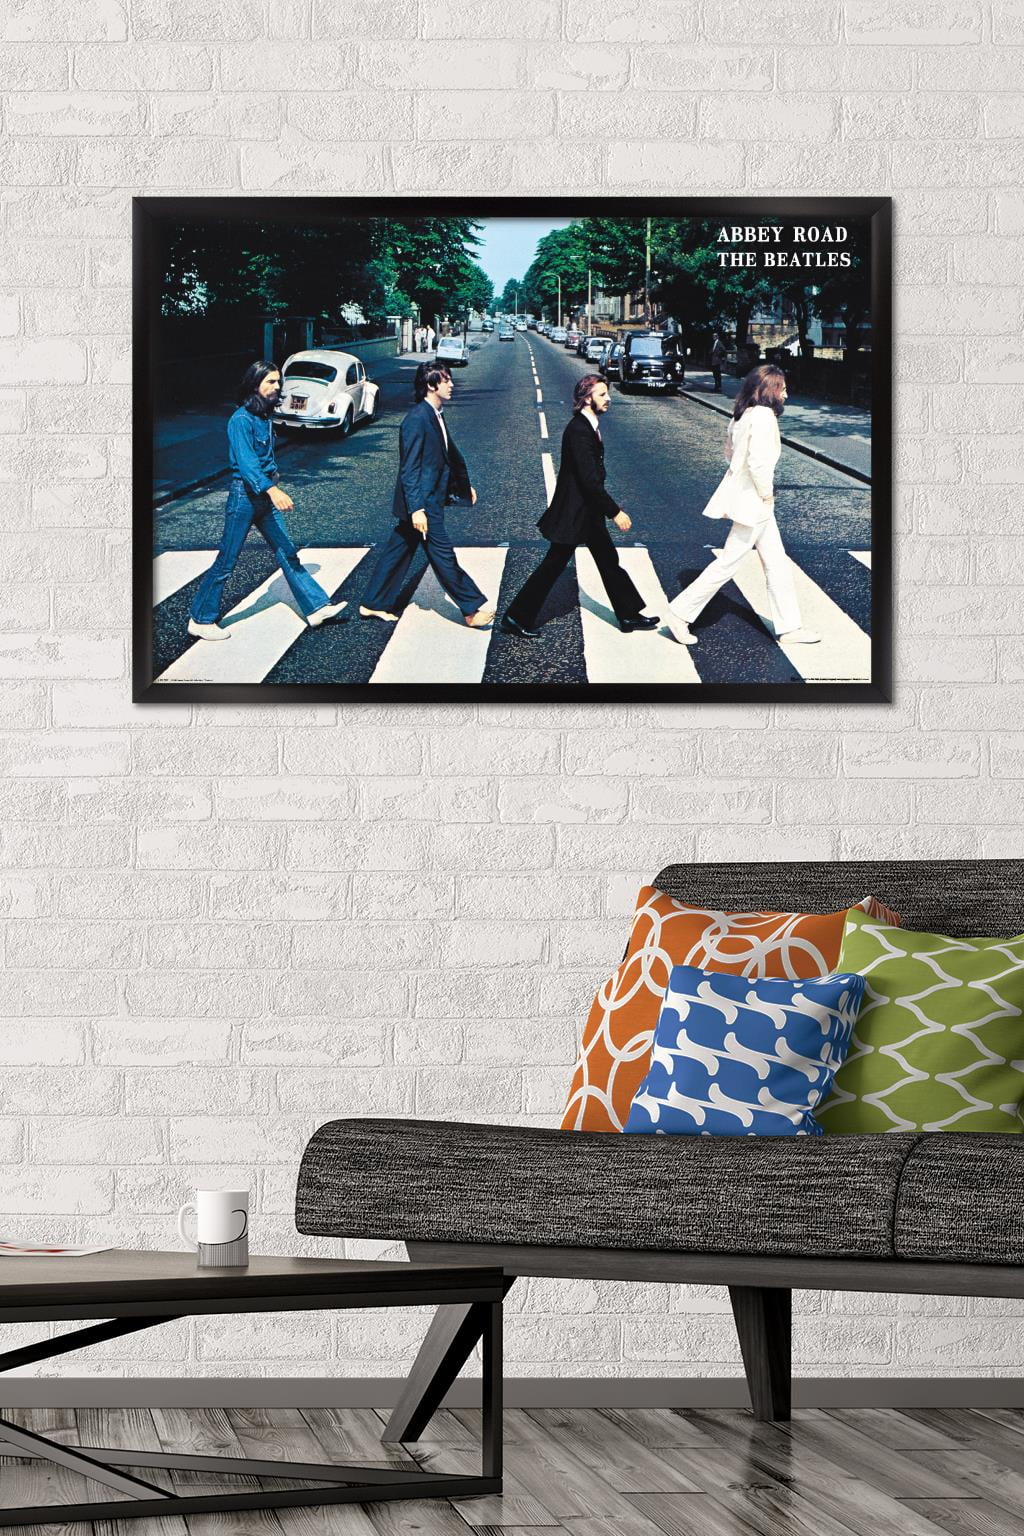 The Beatles - Abbey Road Wall Poster, 22.375